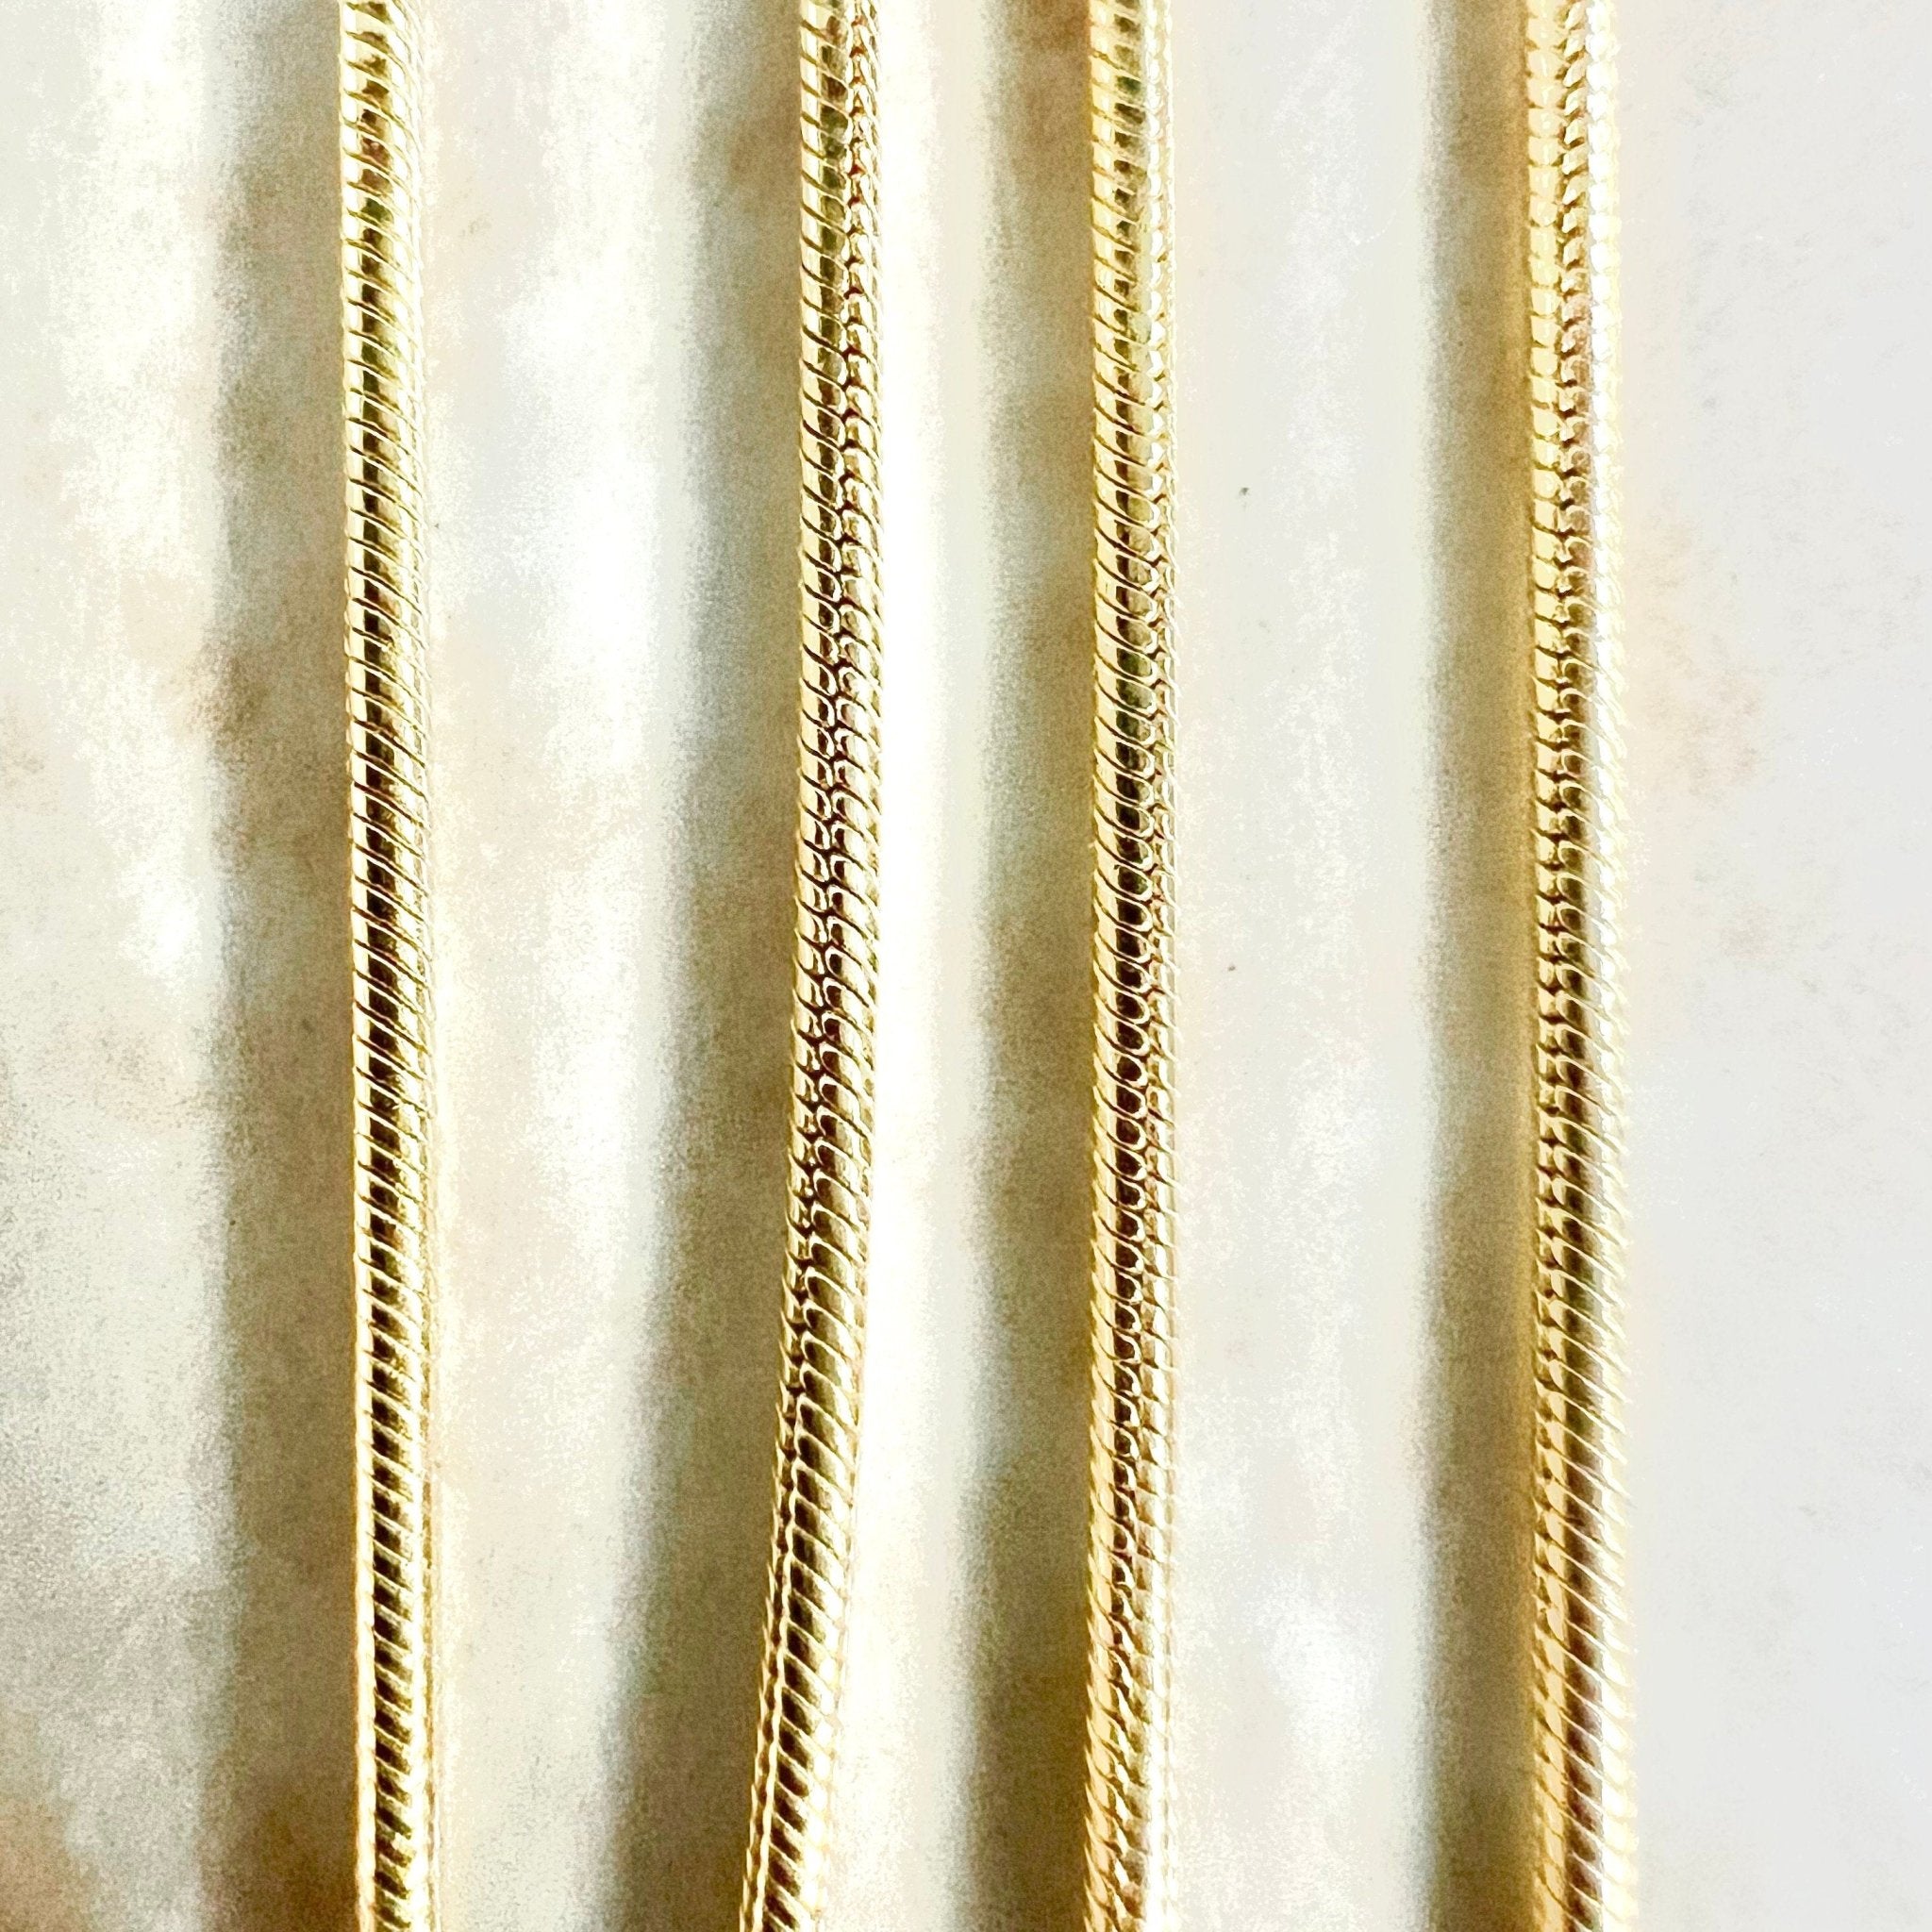 Buy 14K Gold Snake Chain Necklace Online in India - Etsy